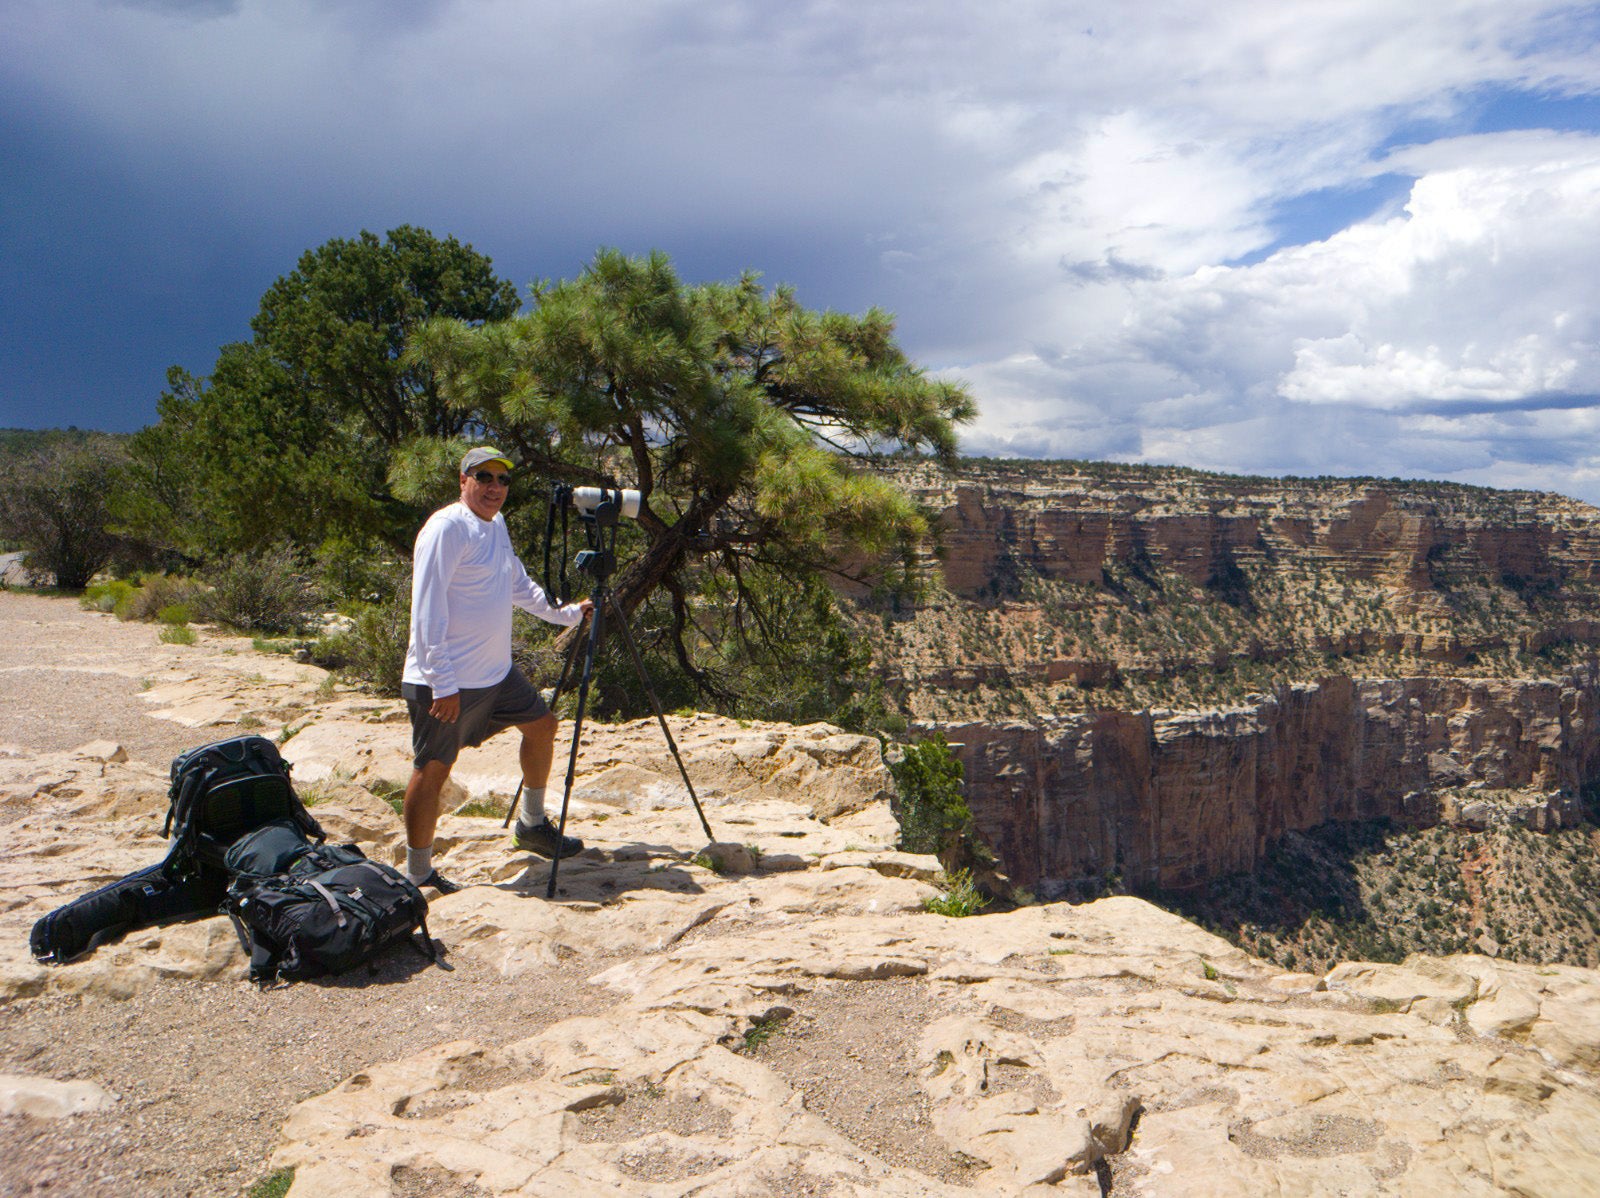 Shooting a VFT in Grand Canyon National Park.